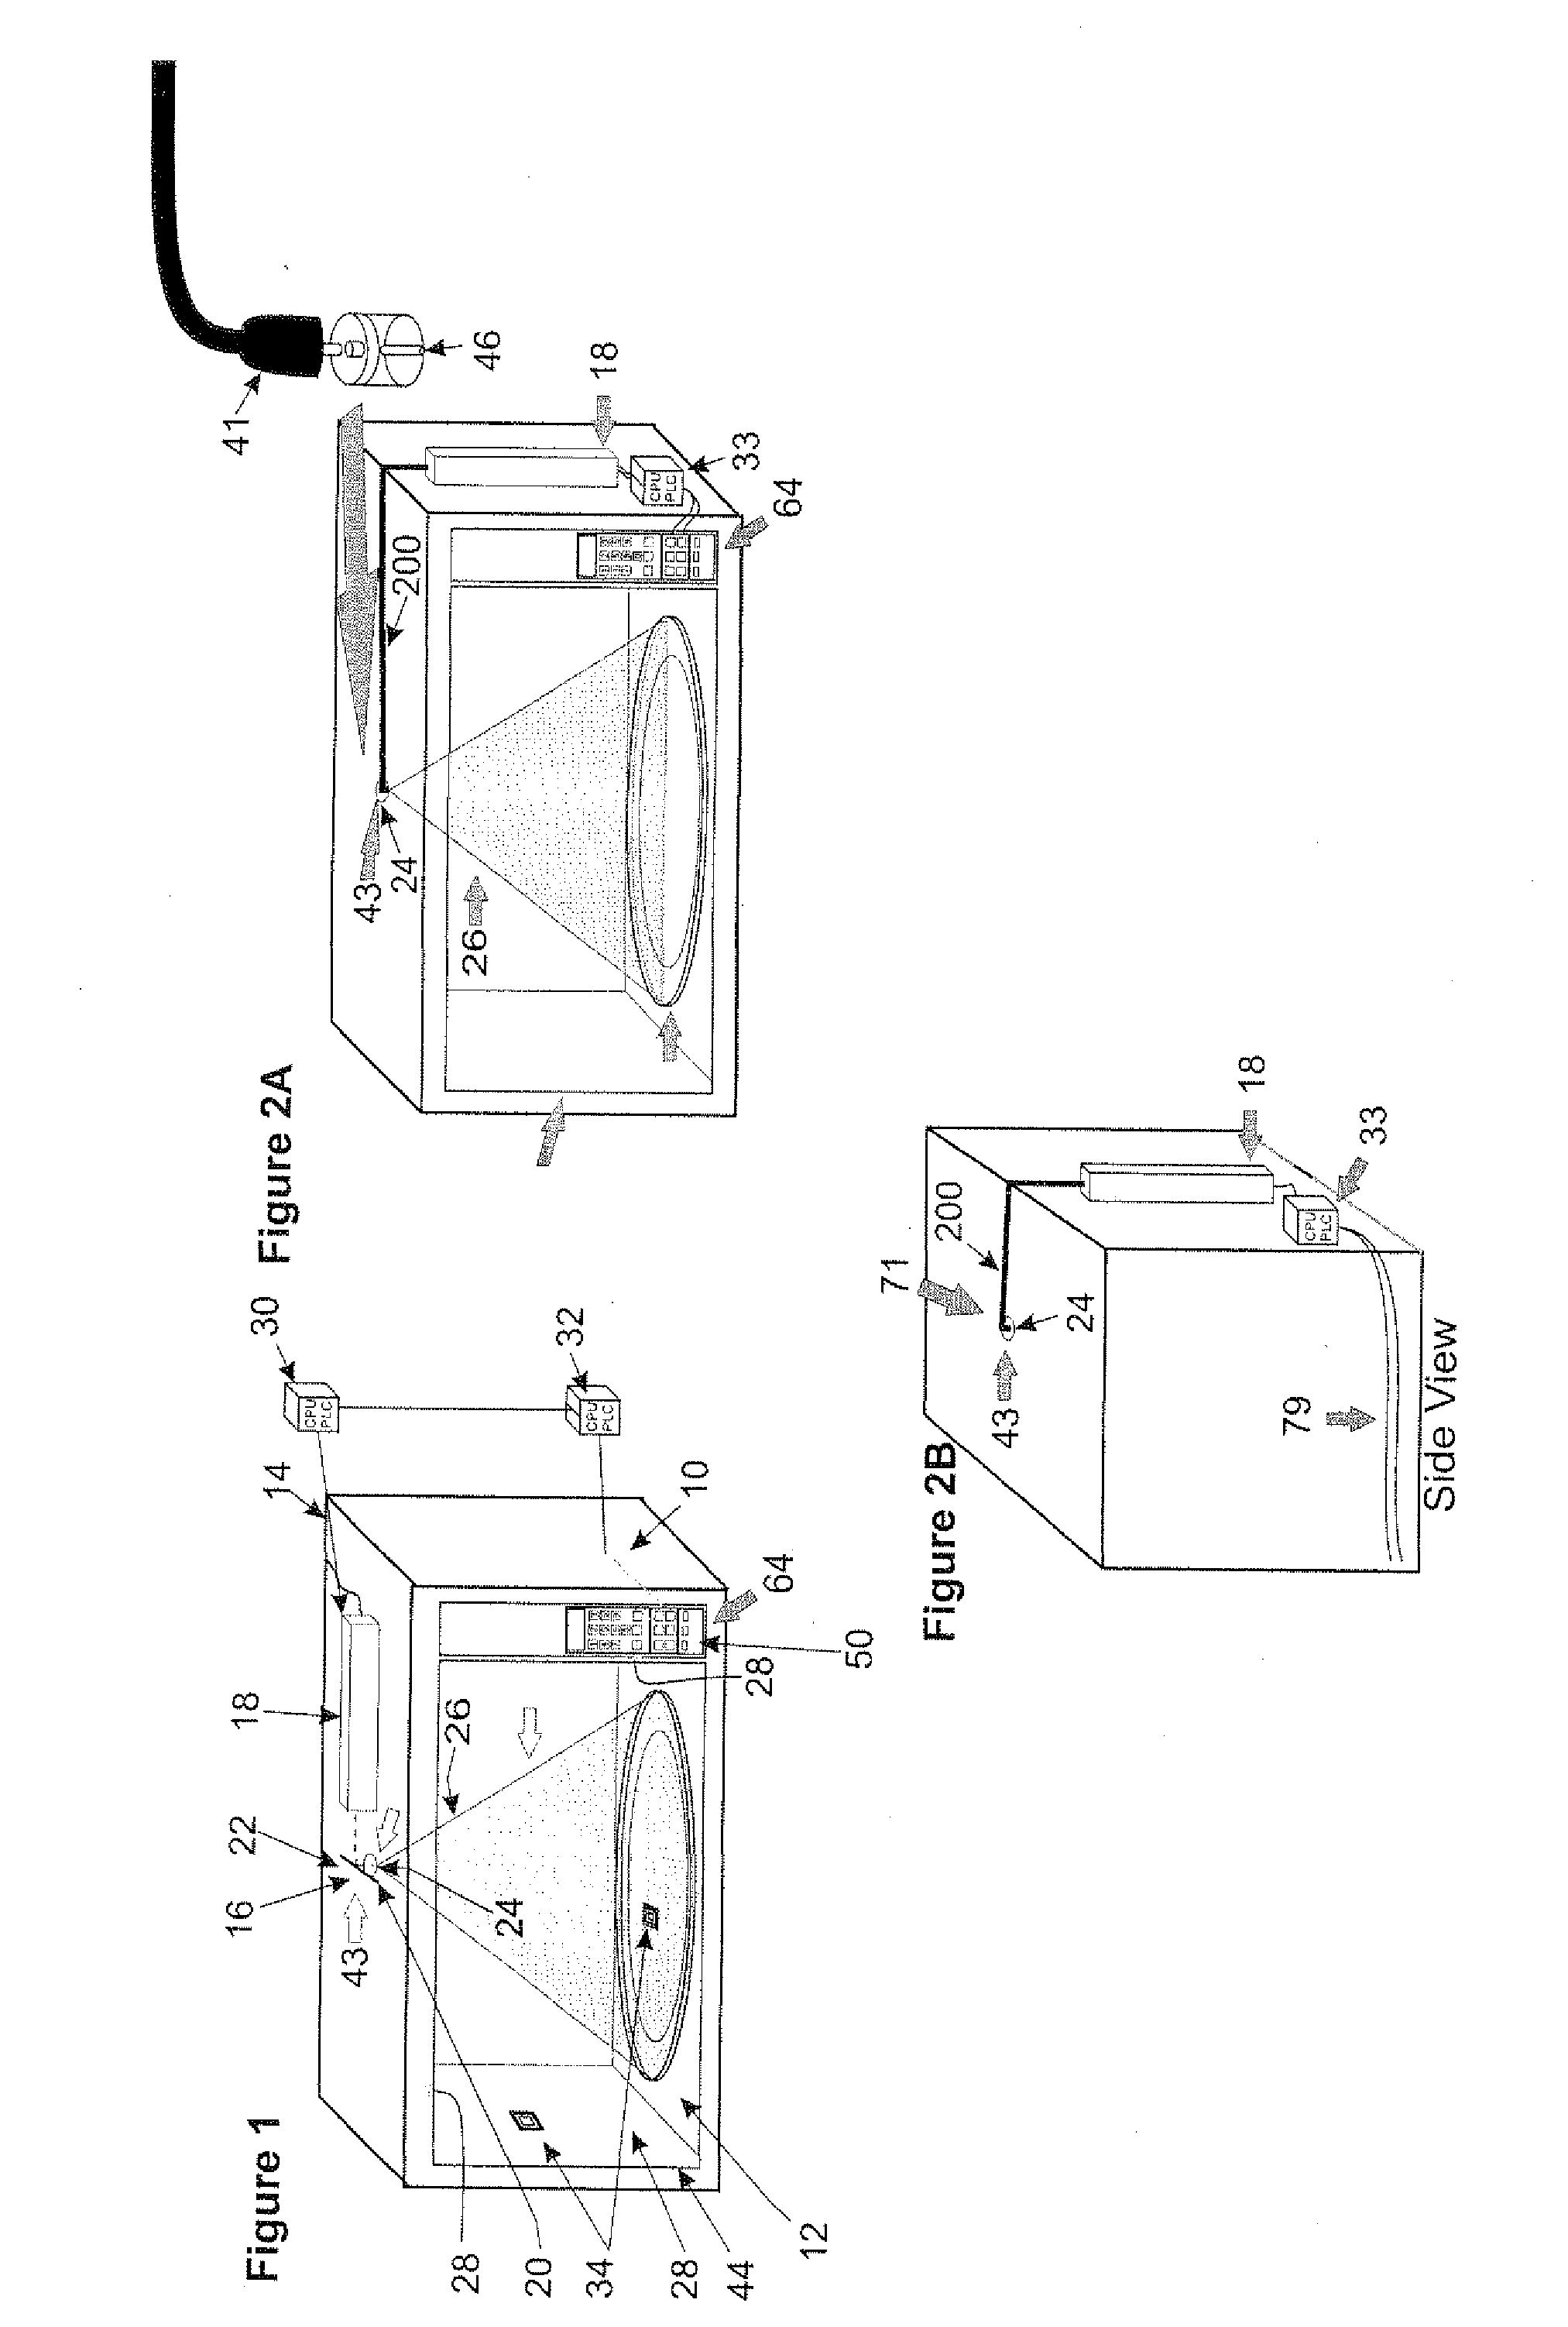 Method and apparatus for surface sanitizing of food products in a cooking appliance using ultraviolet light